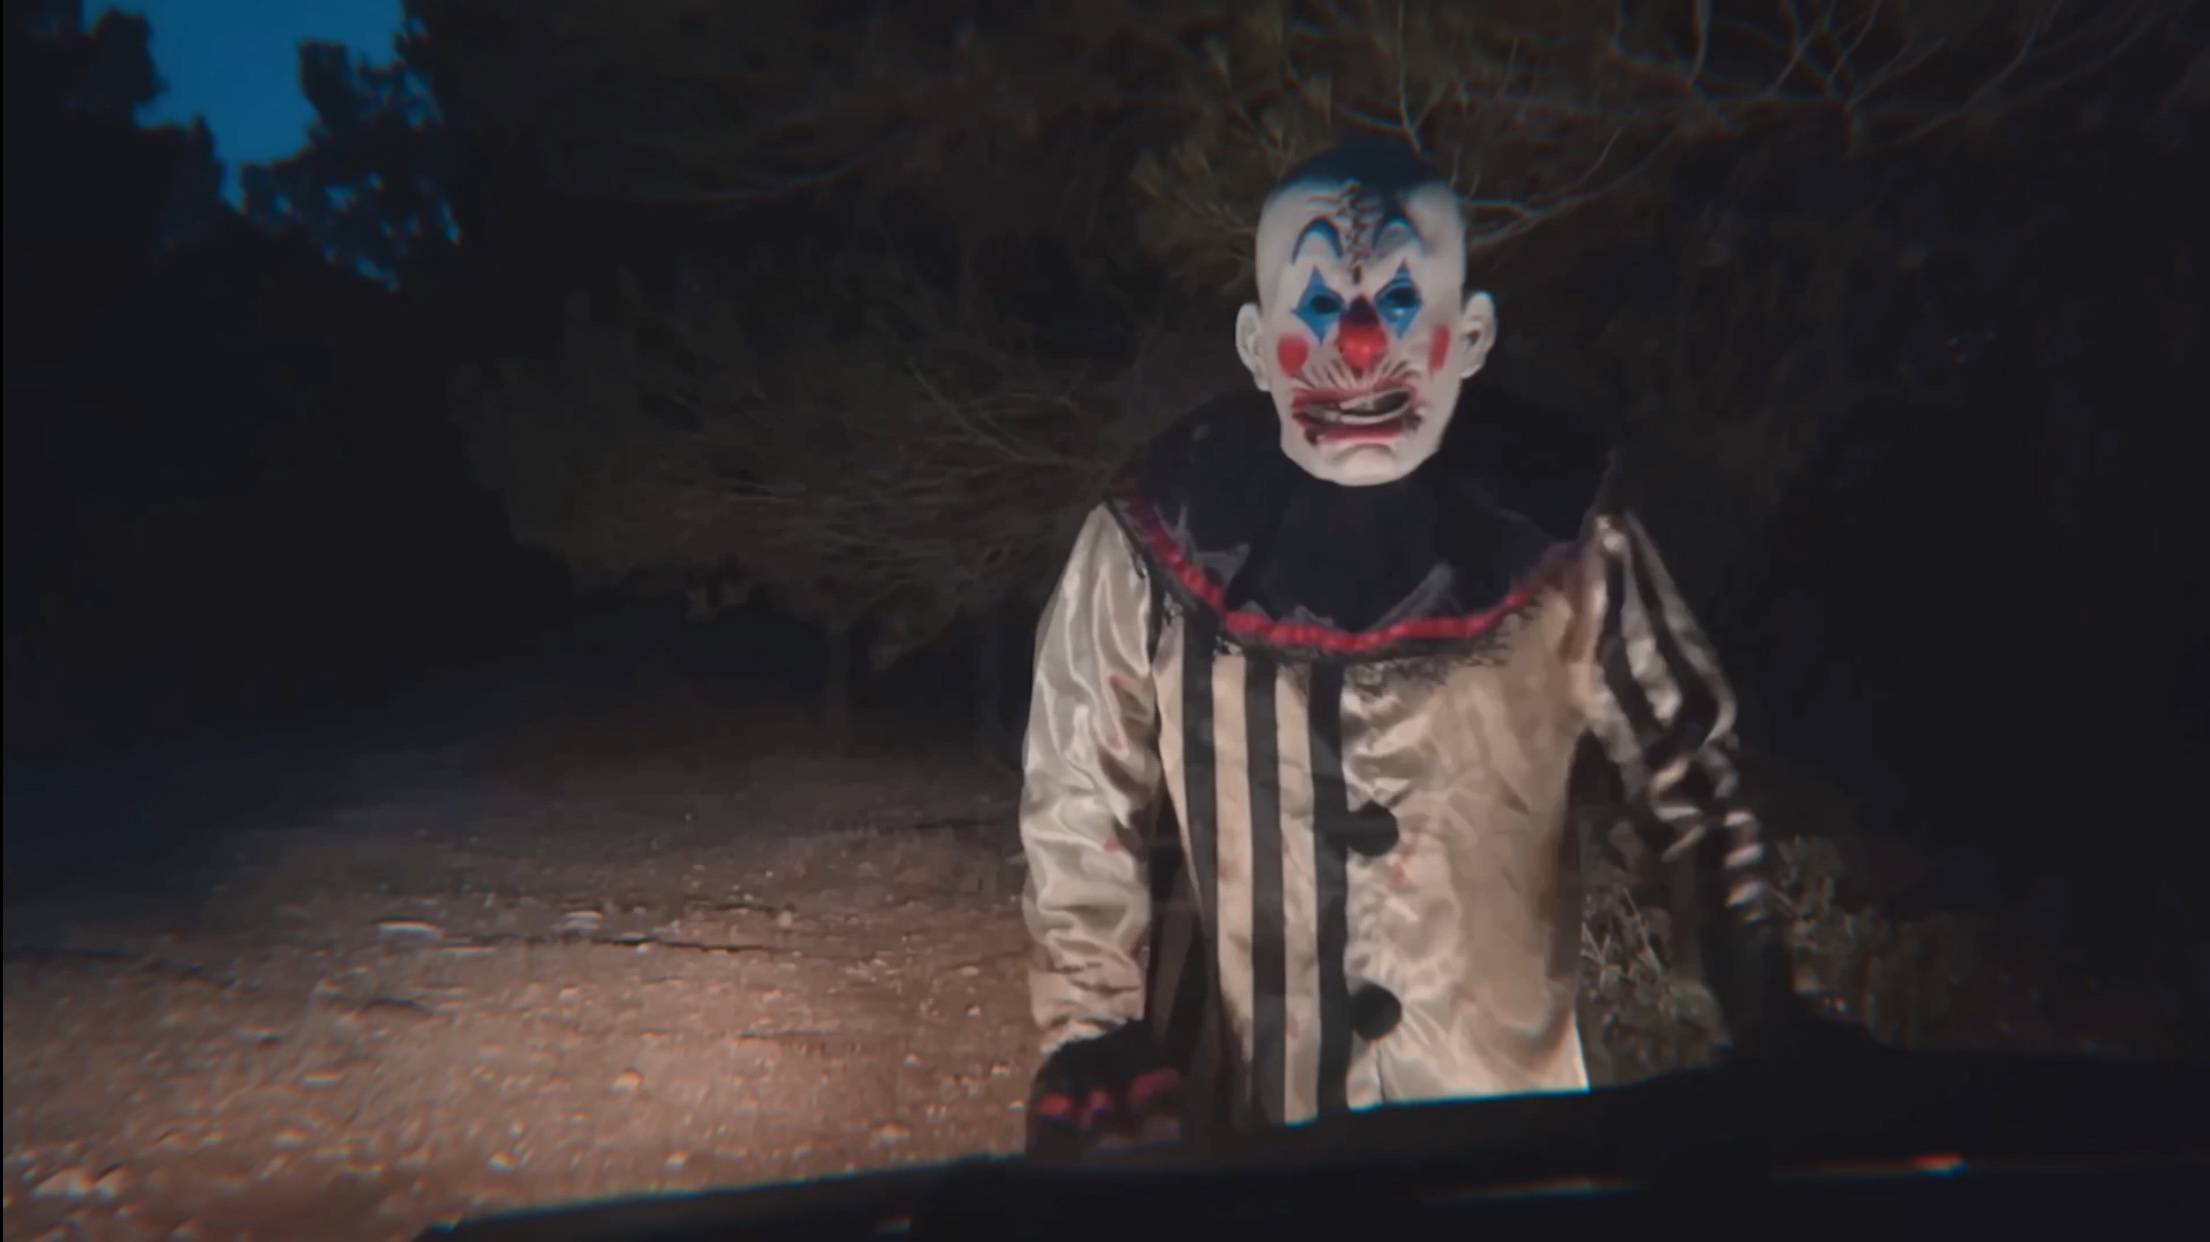 The Thing (Juan Ramos), a clown in blakc and white, is caught in the headlights of a car